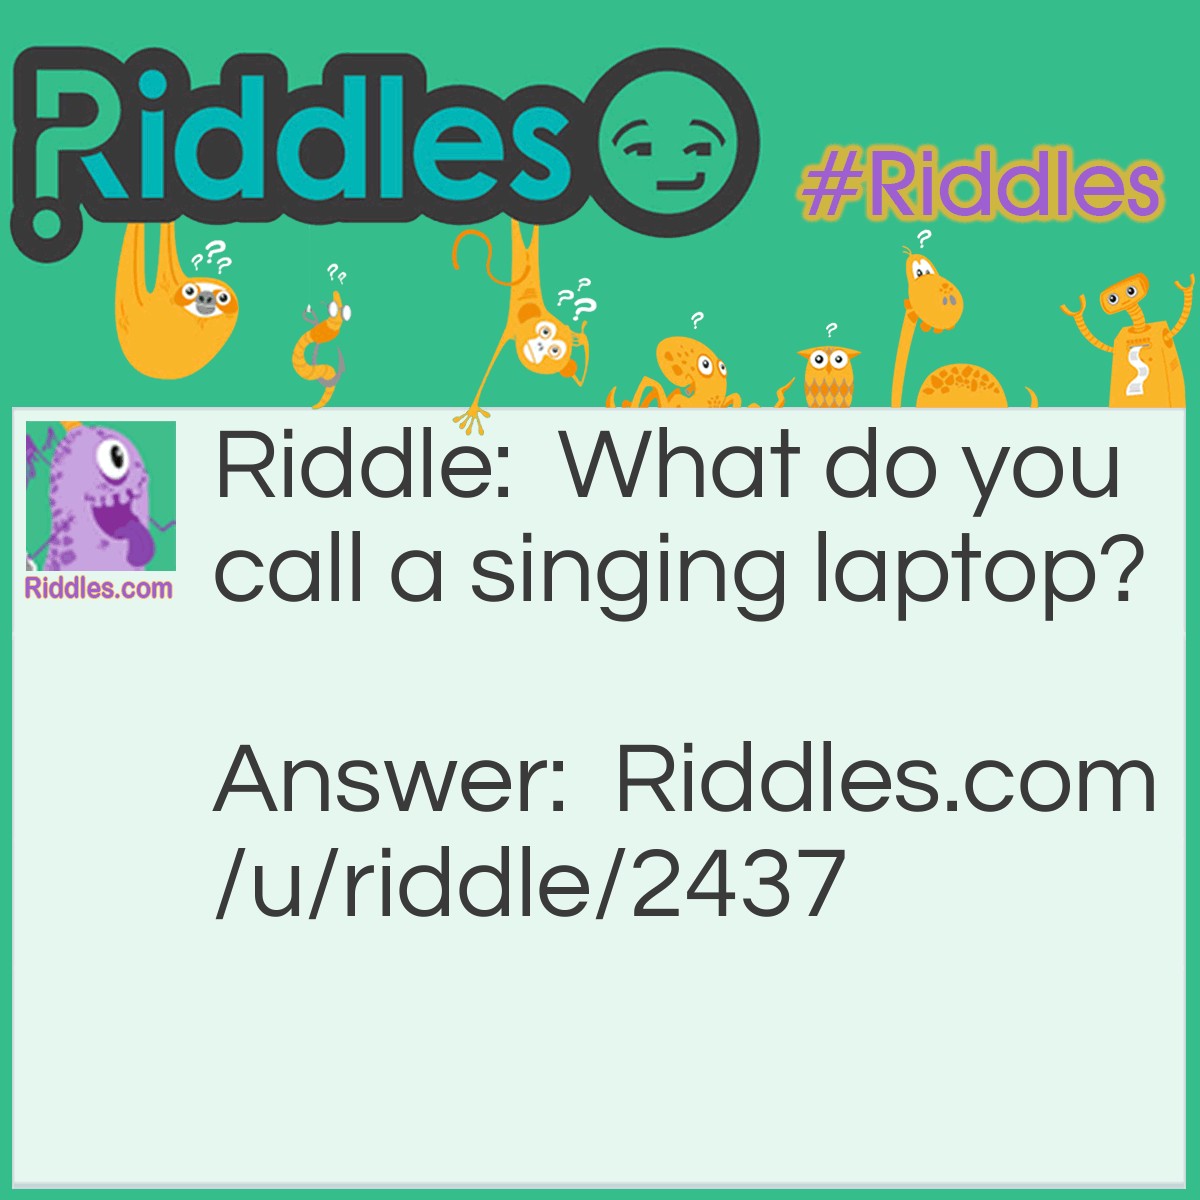 Riddle: What do you call a singing laptop? Answer: A Dell.